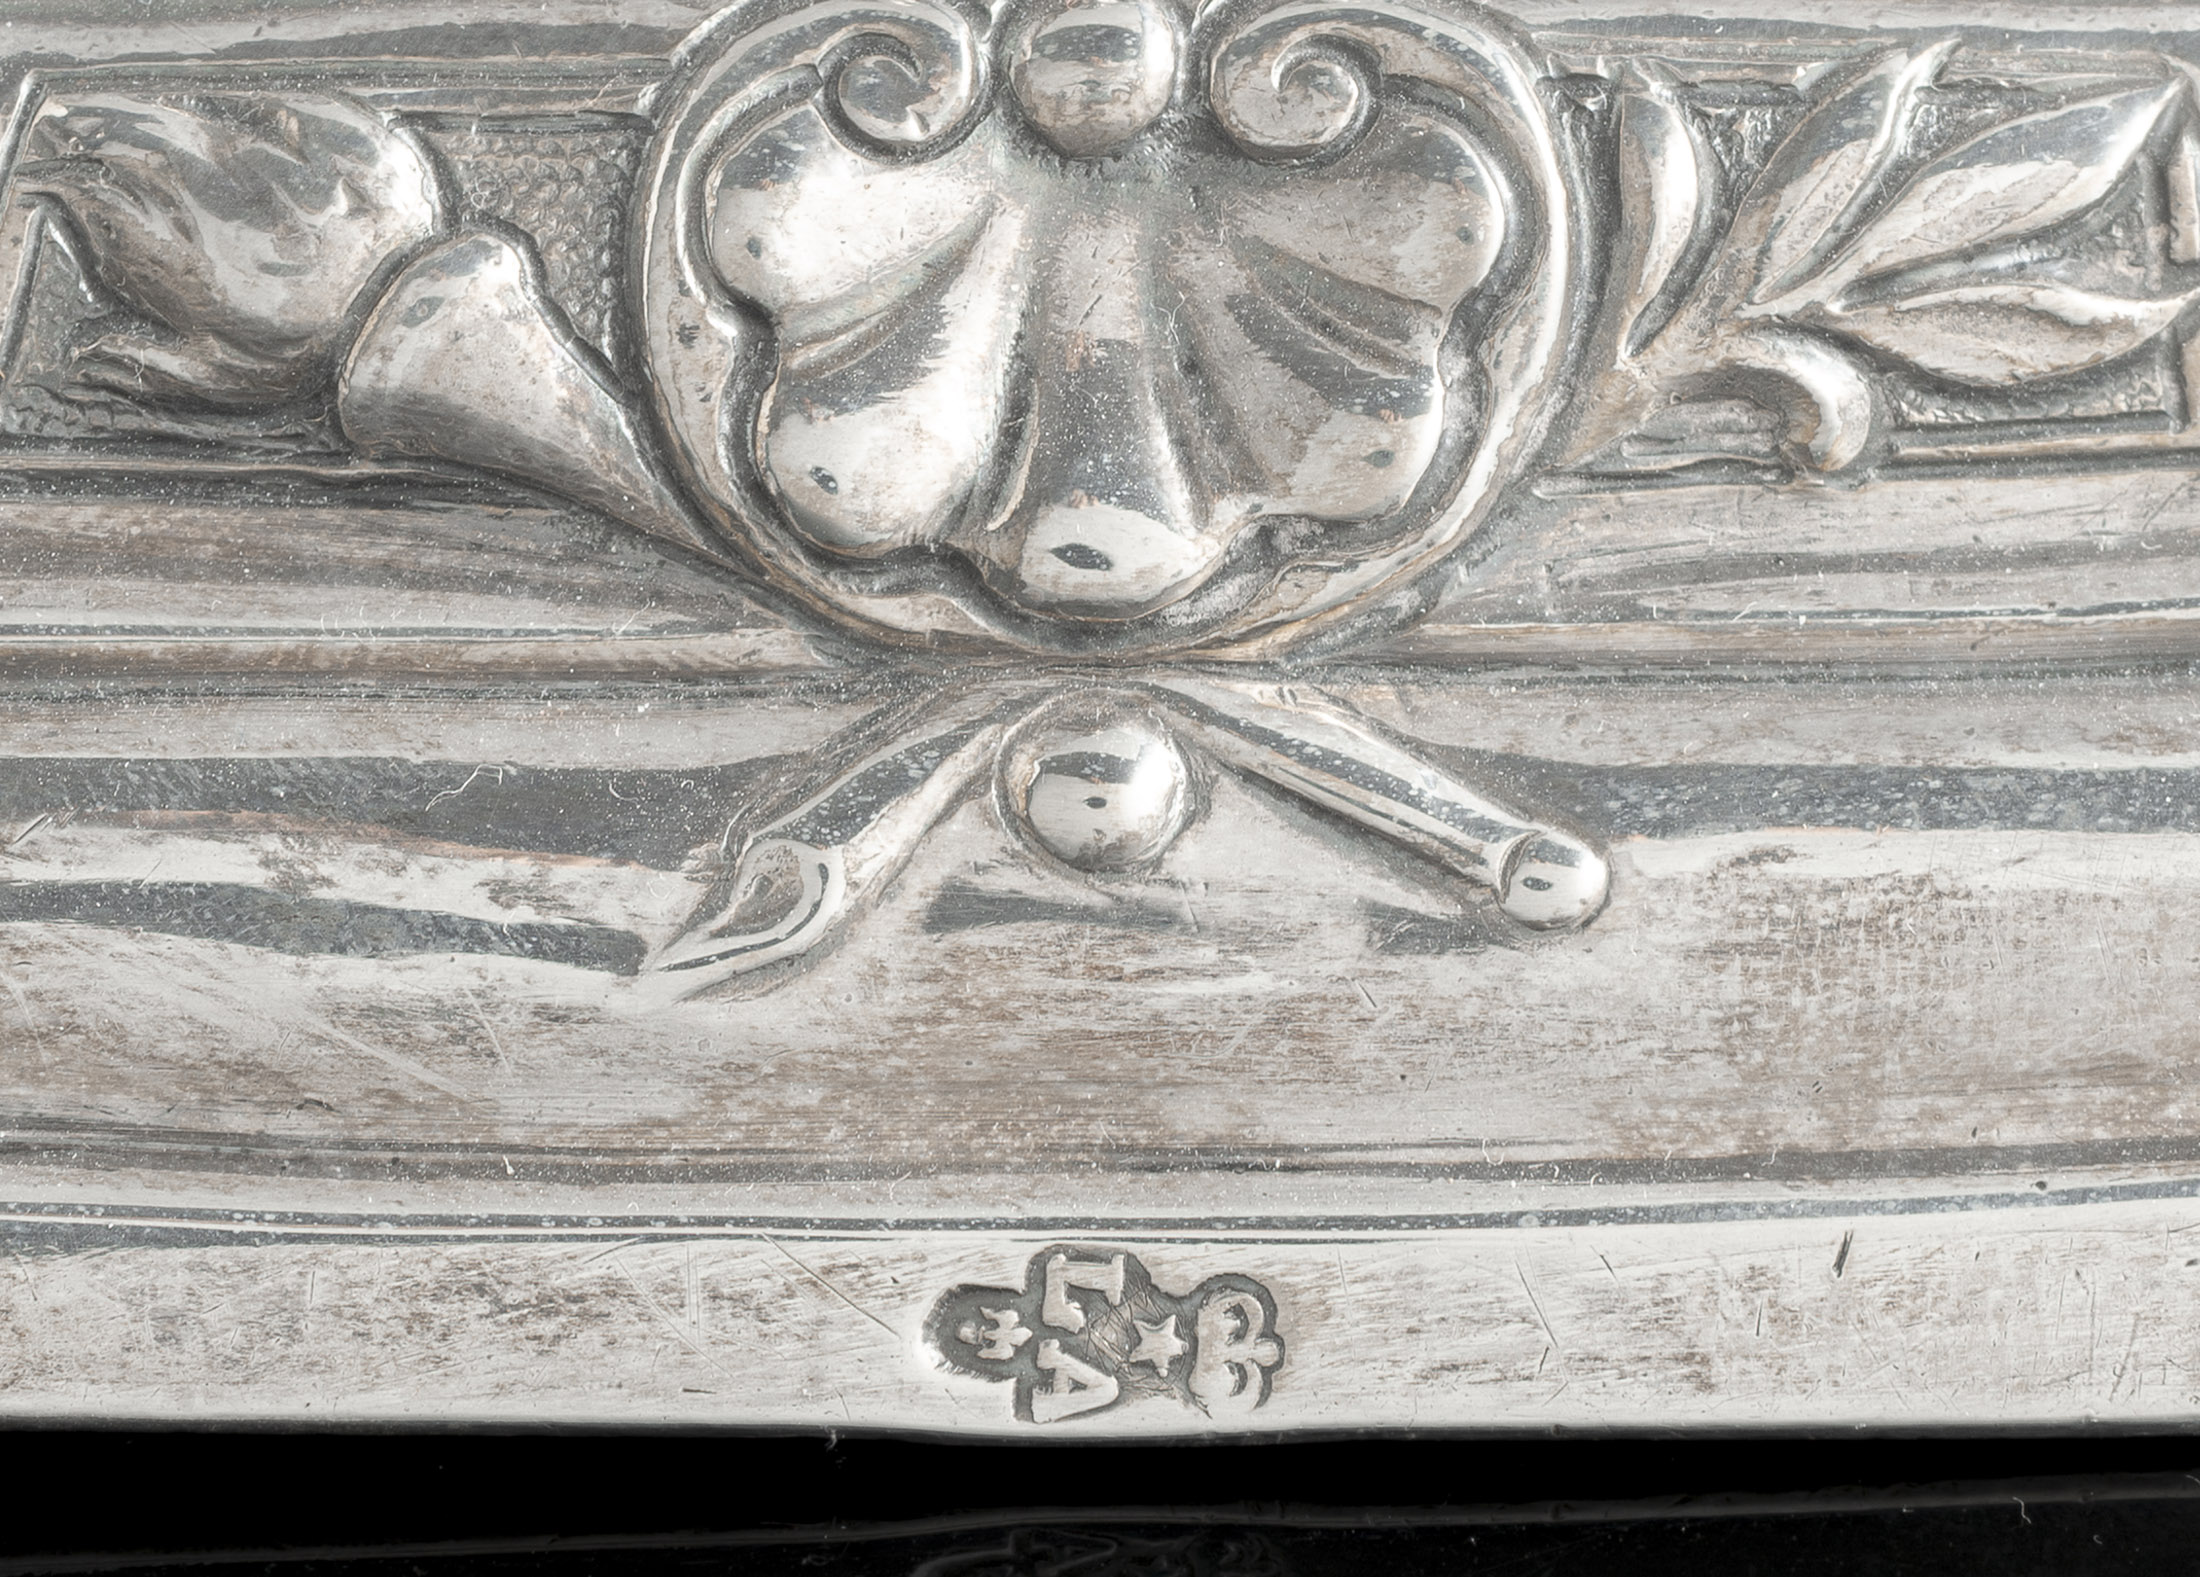 A RARE GEORGE I SILVER CANDLESTICK BY PAUL DE LAMERIE - Image 3 of 3